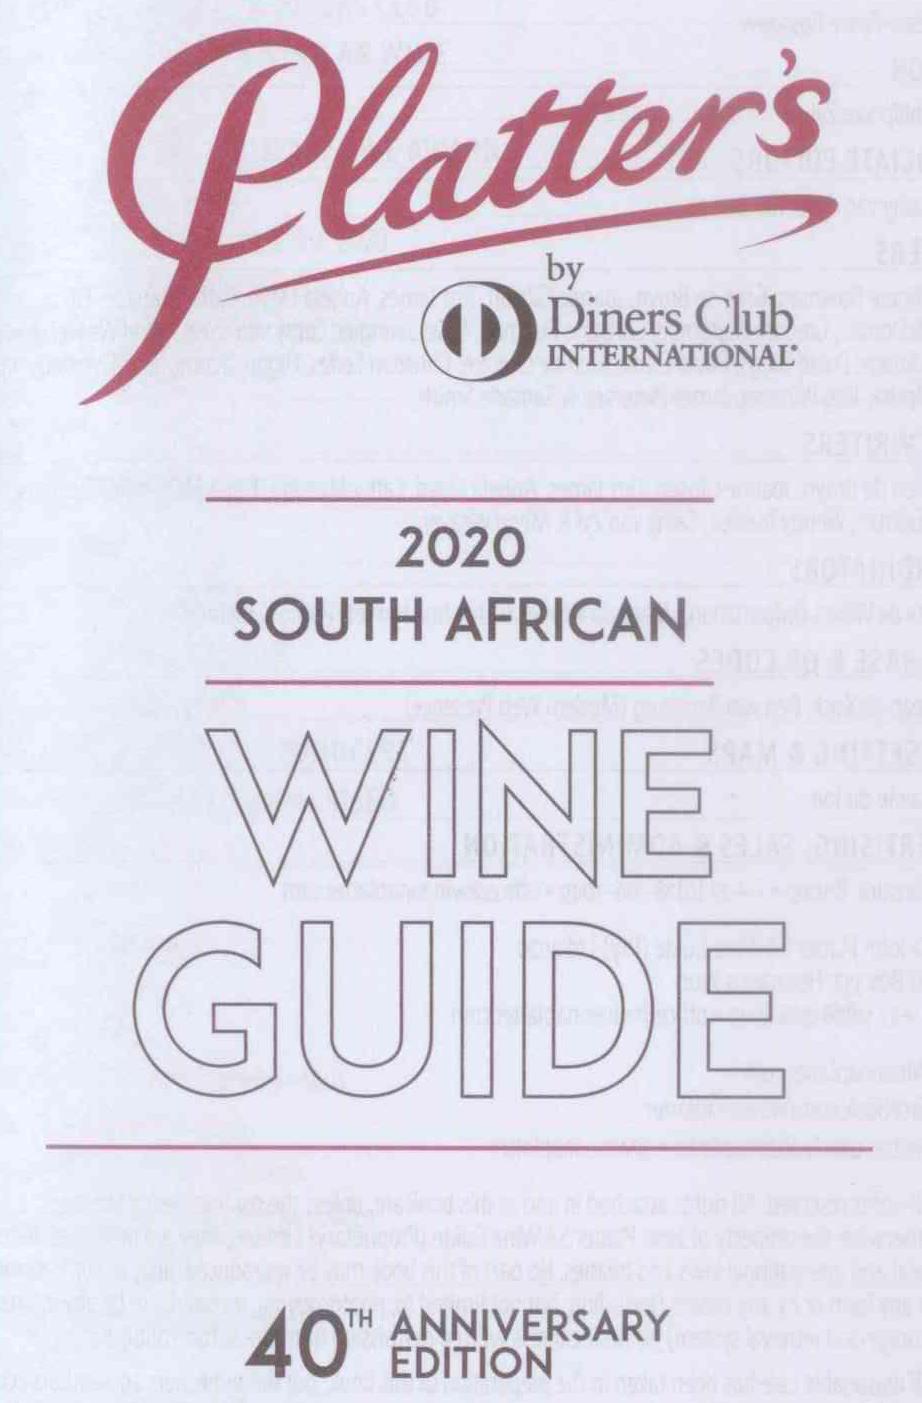 Percy Tours in 2020 John Platter SA Wine Book